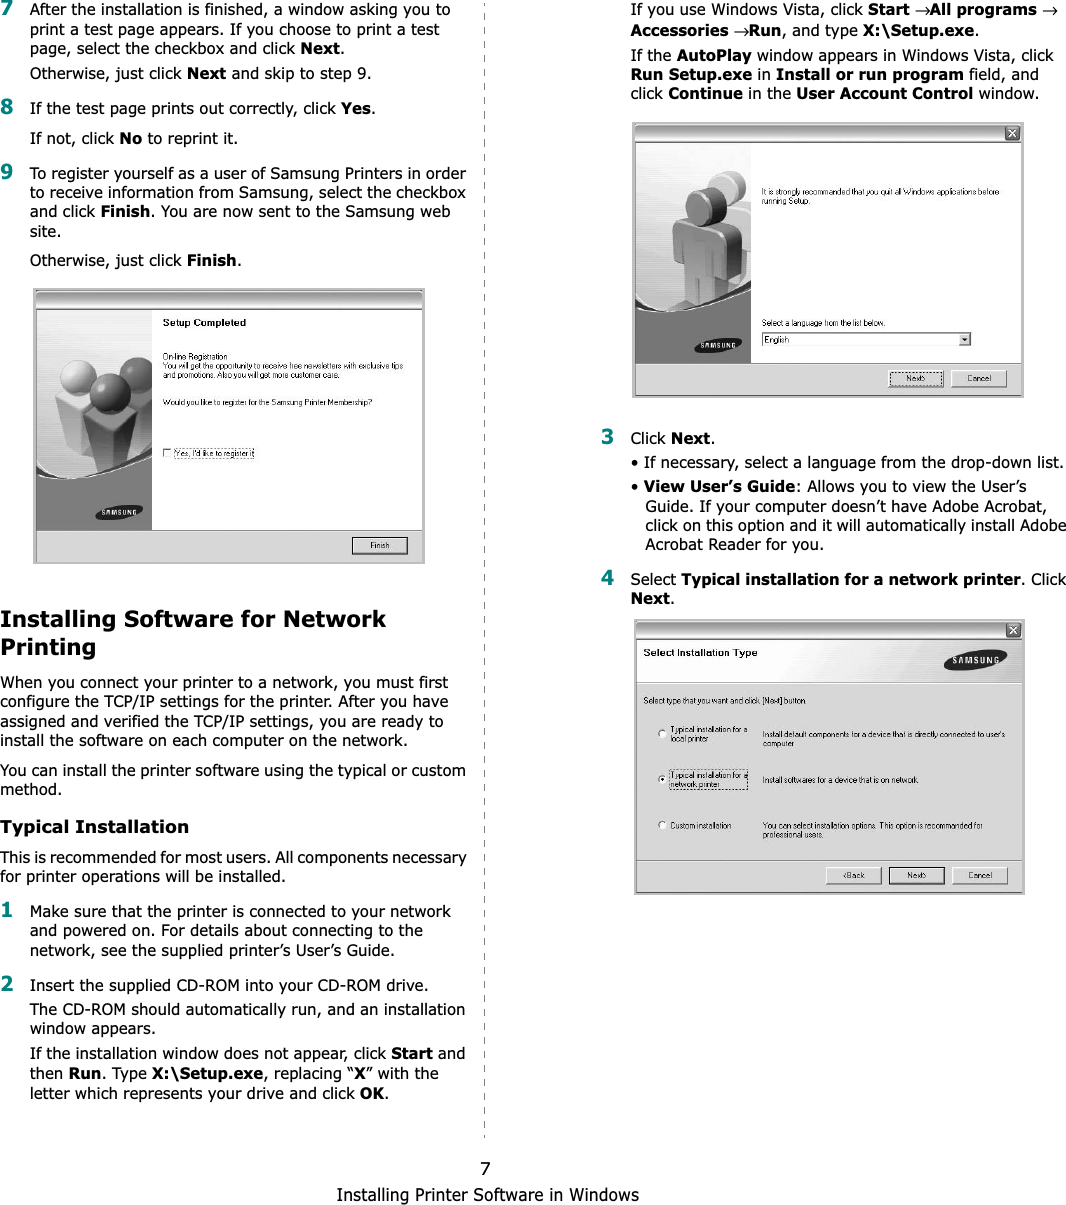 Installing Printer Software in Windows77After the installation is finished, a window asking you to print a test page appears. If you choose to print a test page, select the checkbox and click Next.Otherwise, just click Next and skip to step 9.8If the test page prints out correctly, click Yes.If not, click No to reprint it.9To register yourself as a user of Samsung Printers in order to receive information from Samsung, select the checkbox and click Finish. You are now sent to the Samsung web site.Otherwise, just click Finish.Installing Software for Network PrintingWhen you connect your printer to a network, you must first configure the TCP/IP settings for the printer. After you have assigned and verified the TCP/IP settings, you are ready to install the software on each computer on the network.You can install the printer software using the typical or custom method.Typical InstallationThis is recommended for most users. All components necessary for printer operations will be installed.1Make sure that the printer is connected to your network and powered on. For details about connecting to the network, see the supplied printer’s User’s Guide.2Insert the supplied CD-ROM into your CD-ROM drive.The CD-ROM should automatically run, and an installation window appears.If the installation window does not appear, click Start and thenRun. Type X:\Setup.exe, replacing “X” with the letter which represents your drive and click OK.If you use Windows Vista, click Start→All programs→ Accessories→Run, and type X:\Setup.exe.If the AutoPlay window appears in Windows Vista, click Run Setup.exe in Install or run program field, and clickContinue in the User Account Control window.3Click Next.• If necessary, select a language from the drop-down list.•View User’s Guide: Allows you to view the User’s Guide. If your computer doesn’t have Adobe Acrobat, click on this option and it will automatically install Adobe Acrobat Reader for you.4Select Typical installation for a network printer. Click Next.